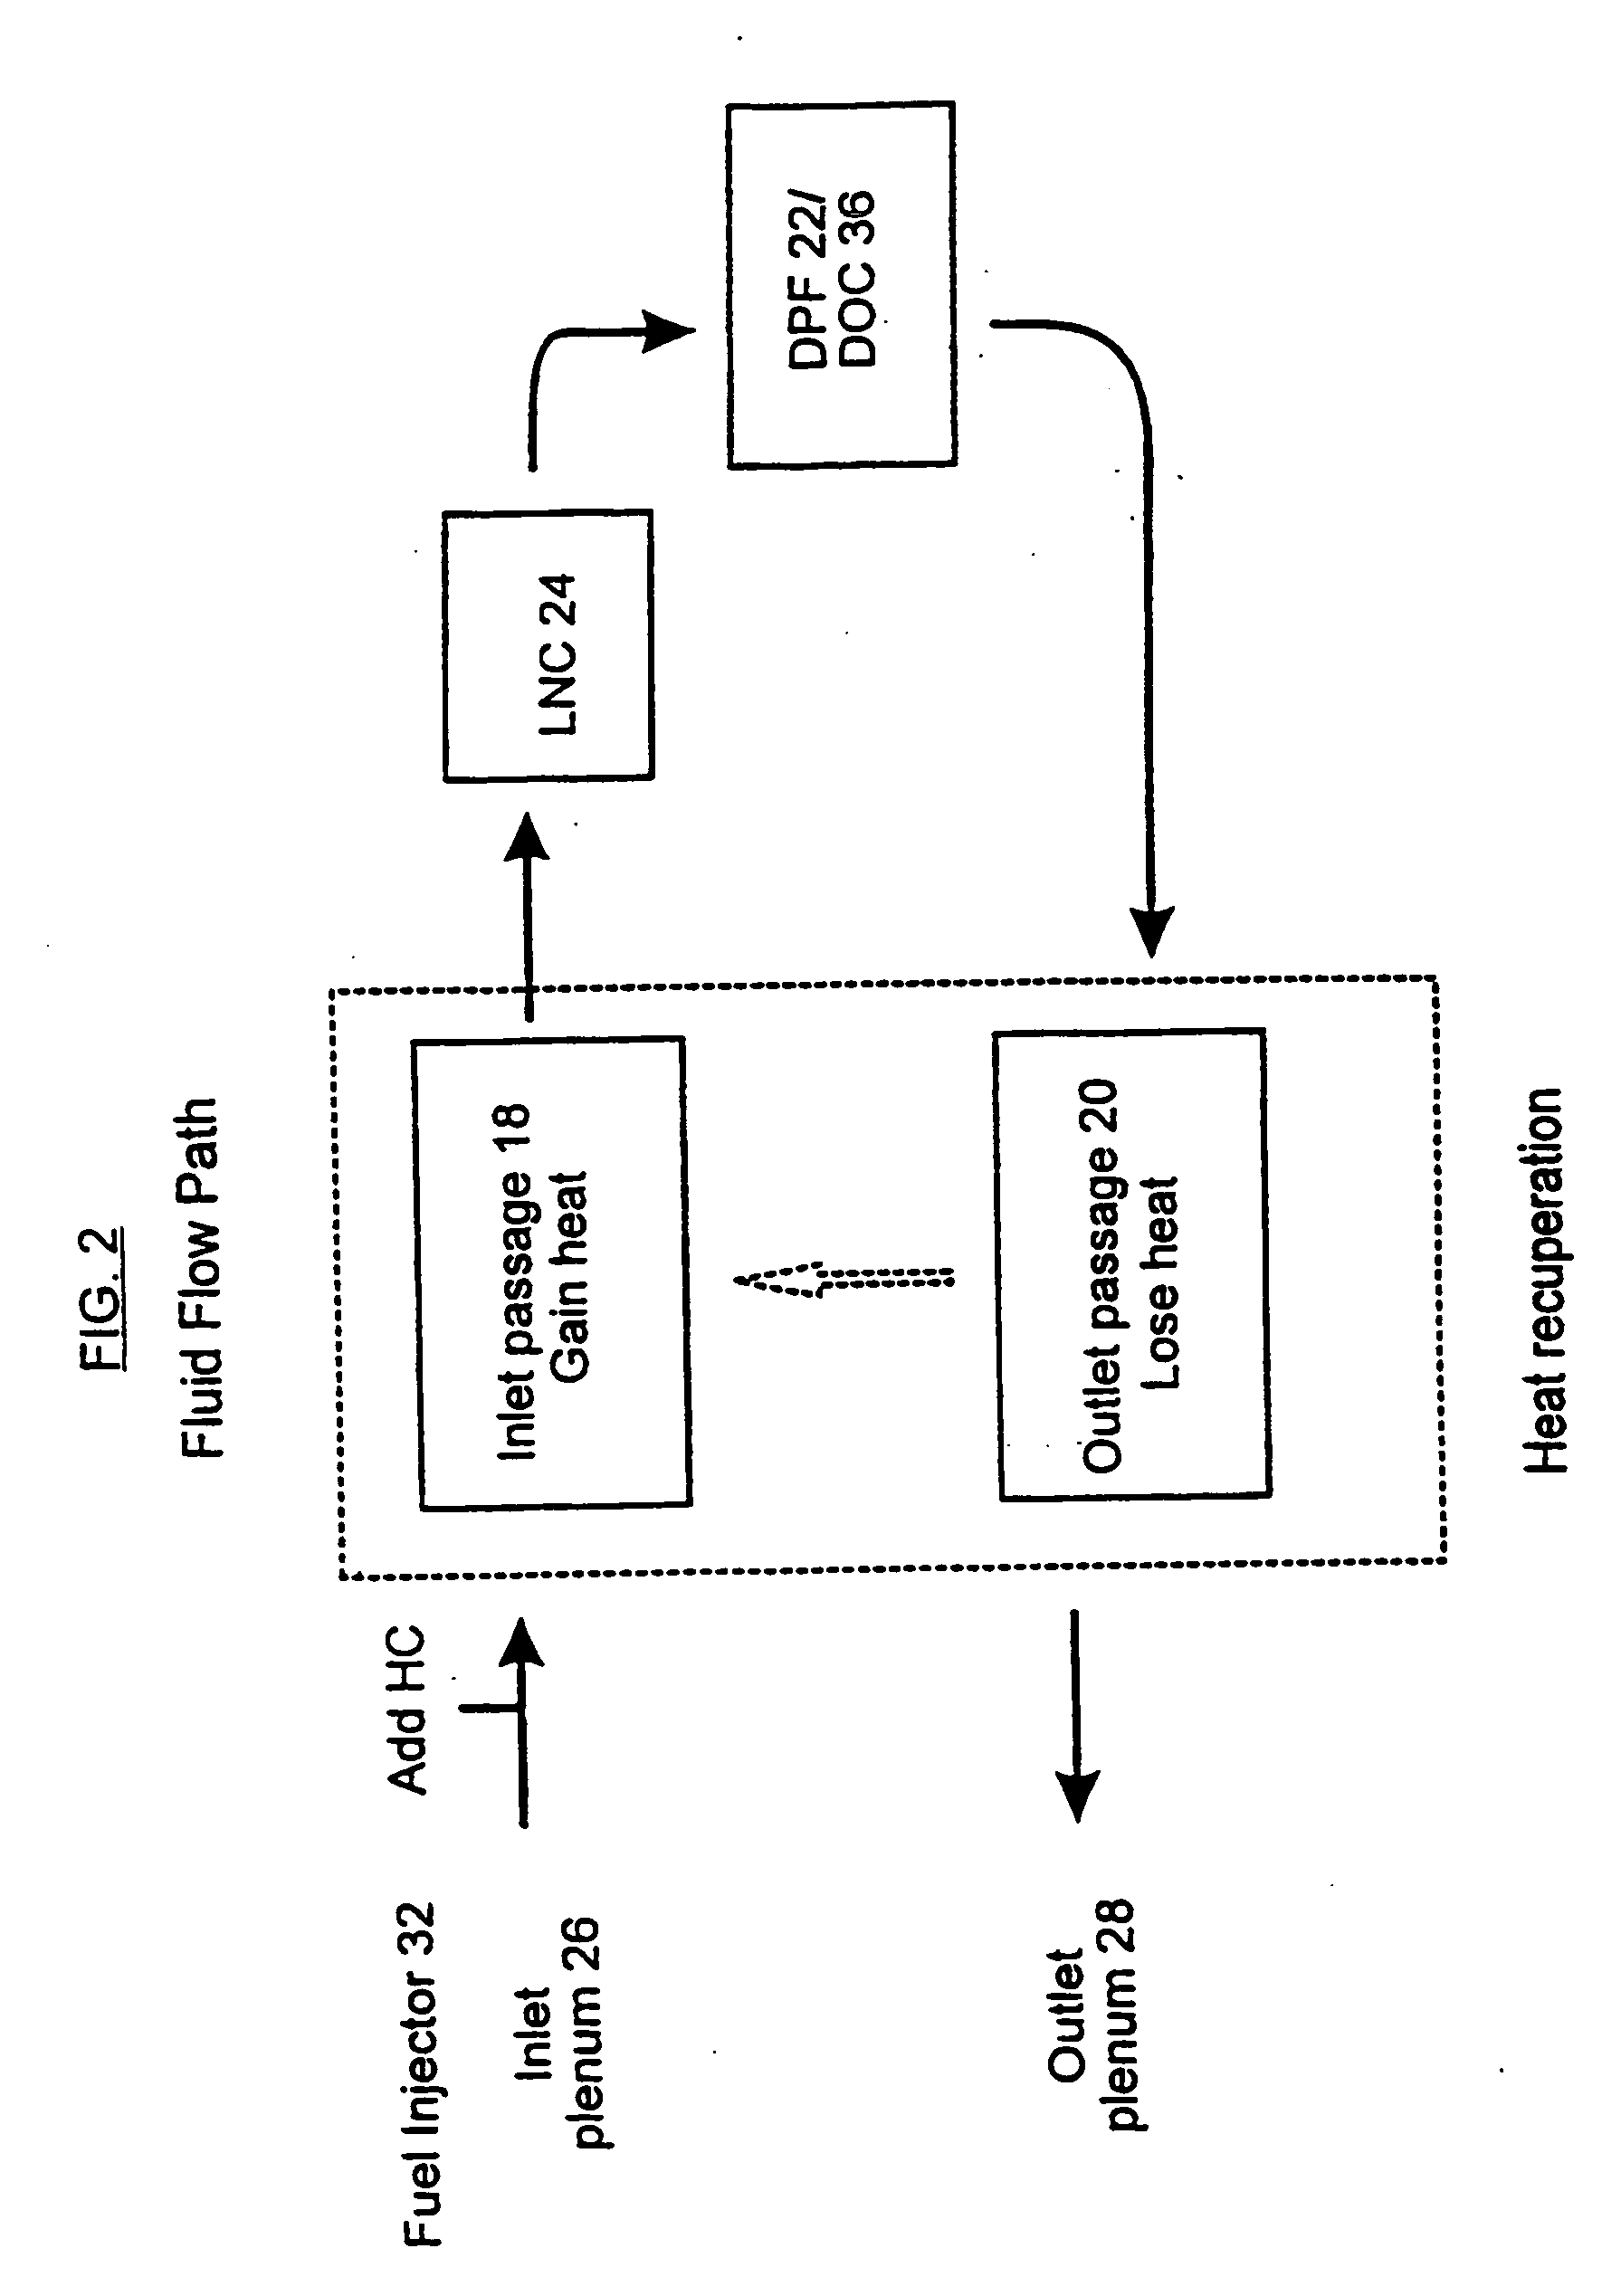 Integrated apparatus for removing pollutants from a fluid stream in a lean-burn environment with heat recovery